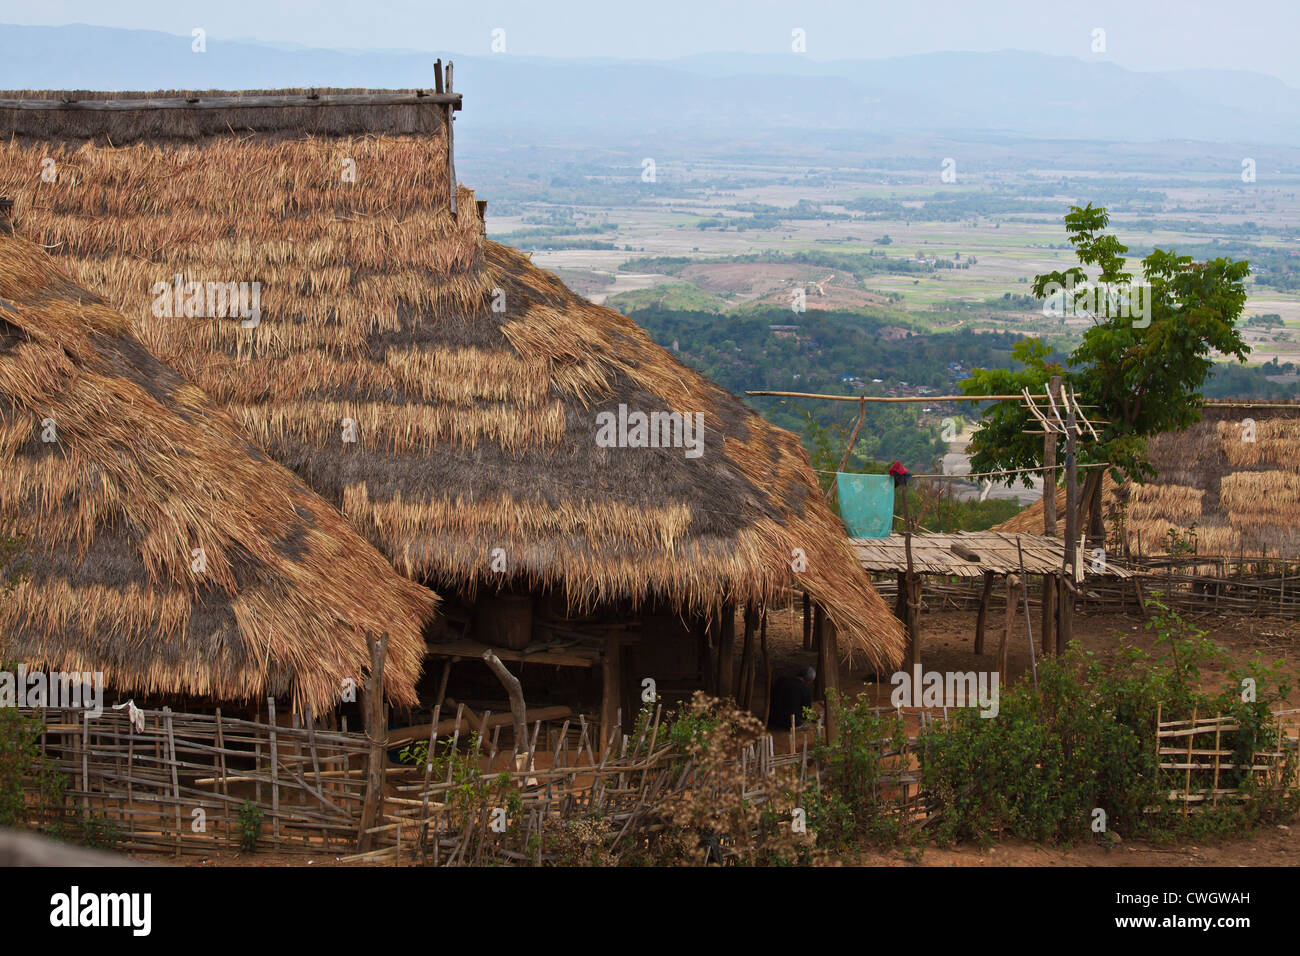 A THATCHED ROOF HOUSE in an AKHA village near KENGTUNG or KYAINGTONG - MYANMAR Stock Photo